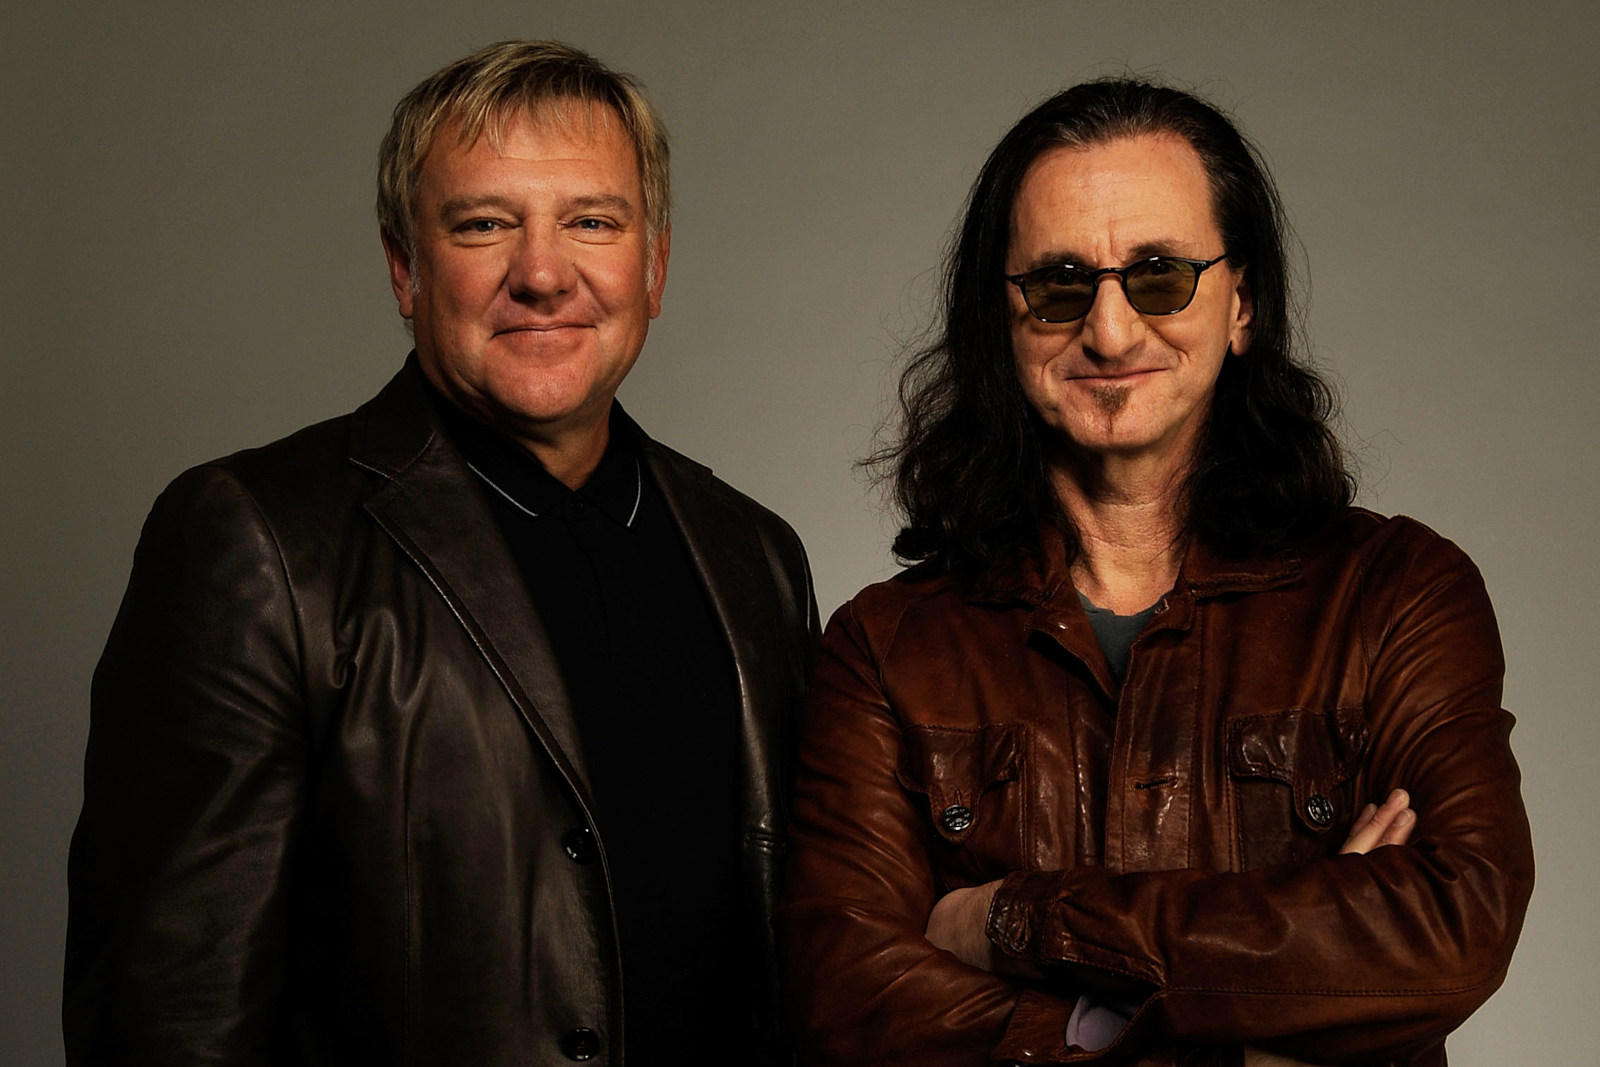 Rush: 'Our fans feel vindicated', Pop and rock